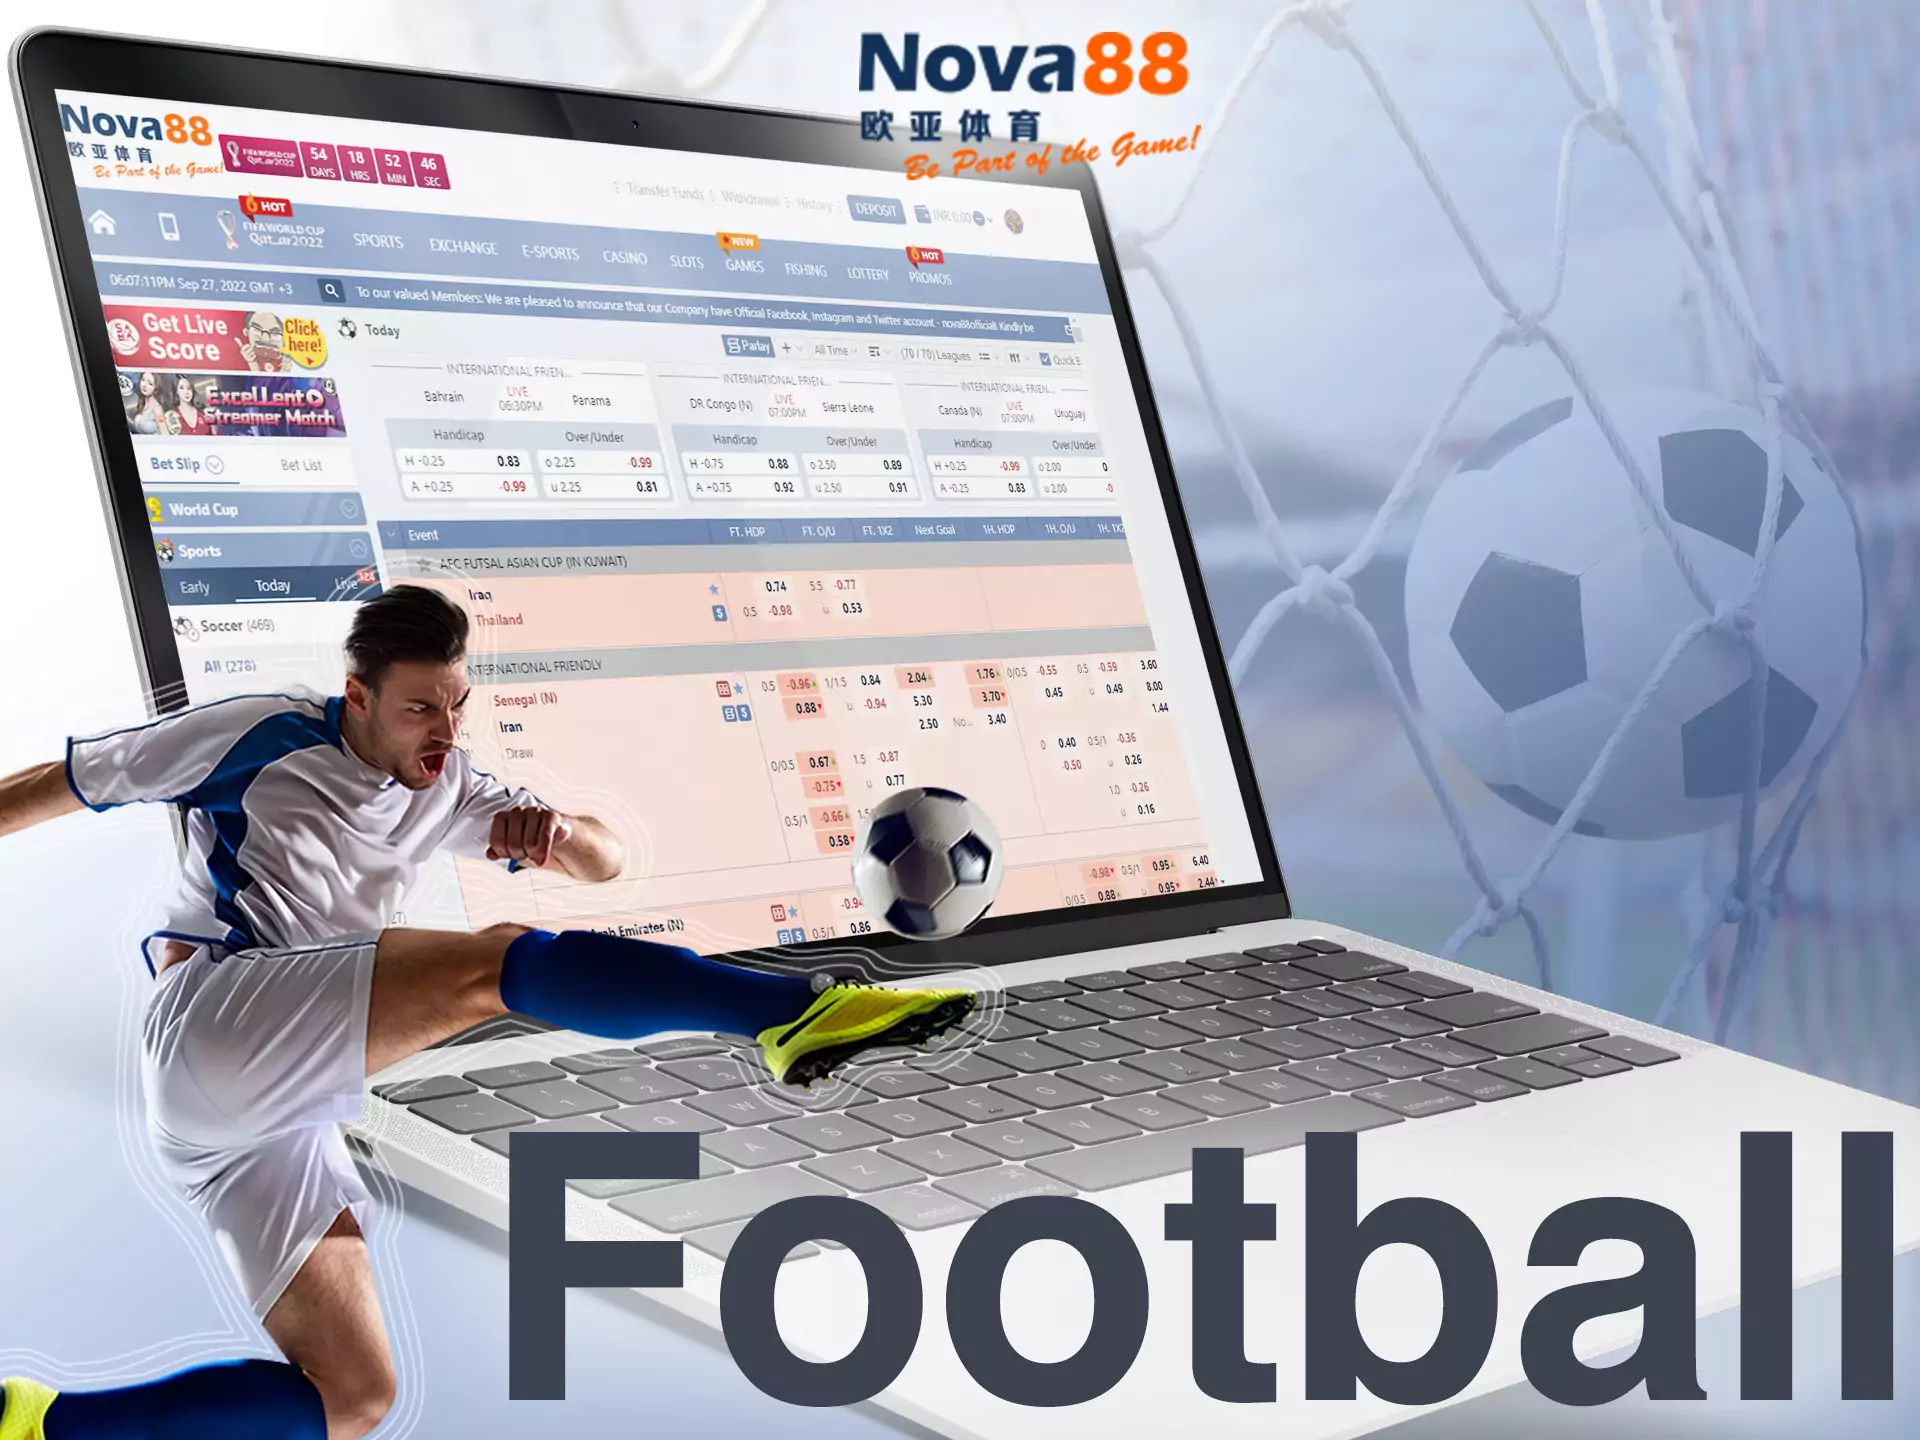 In the Nova88 sportsbook, you can place bets on football matches.